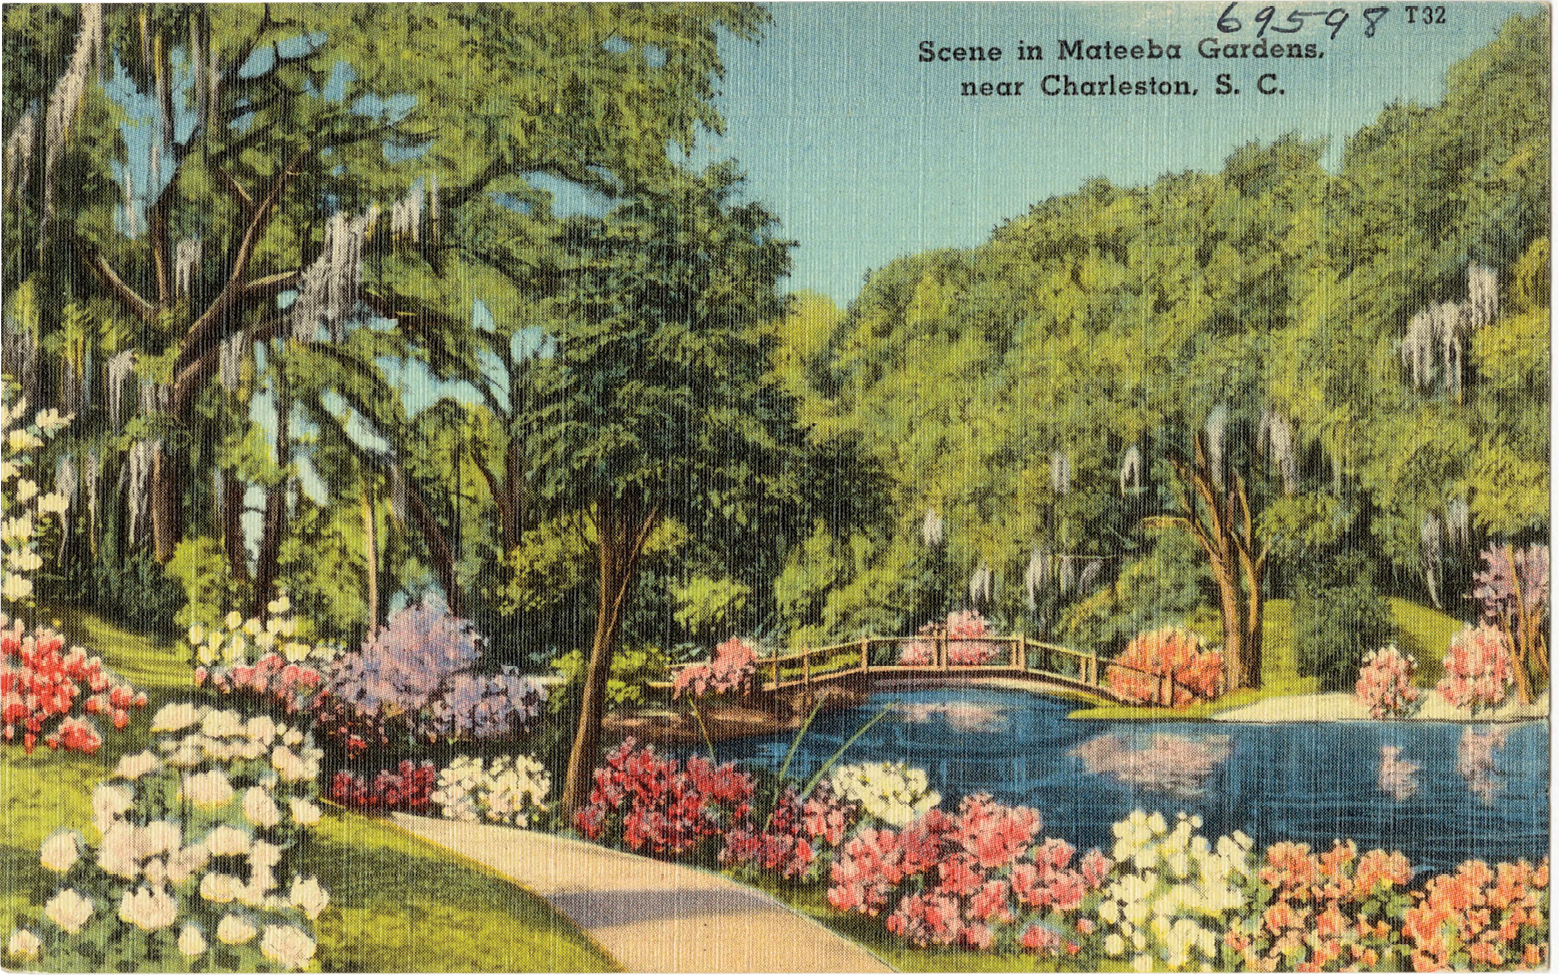 Scene in Mateeba Gardens: “Mateeba Gardens are built on the estate of Lord Baron Ashley, granted in the year 1675. Visitors claim them ‘A Fairyland on Earth.’” Located just up the Ashley River from Middleton Place, the Wragg Plantation gardens were “open to the public from the mid-1940s until they were severely damaged by an ice storm about 1965,” according to the website, South Carolina Plantations